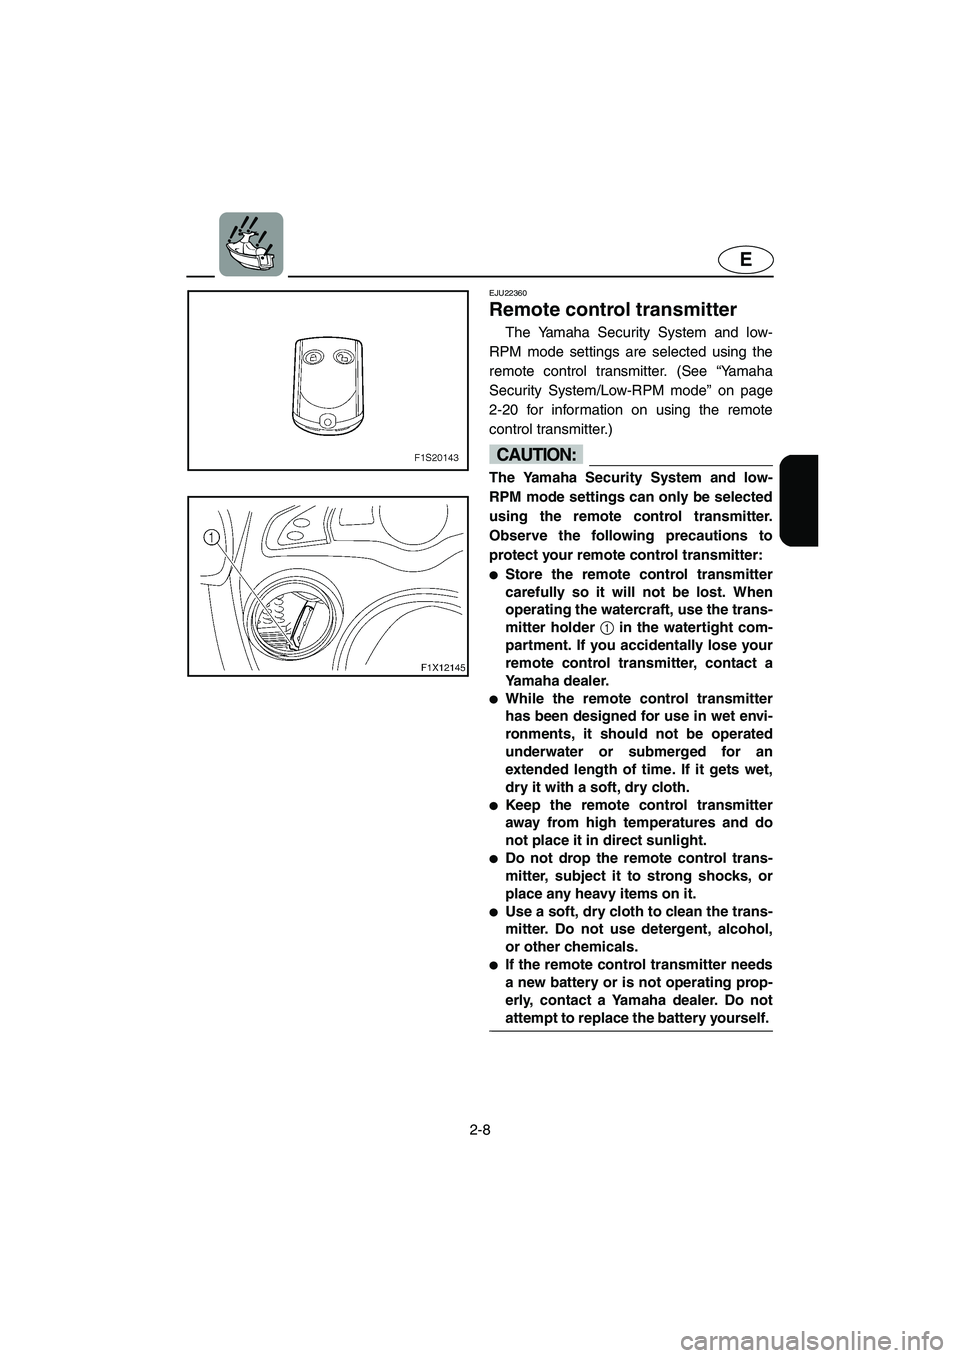 YAMAHA FX HO 2006 Owners Guide 2-8
E
EJU22360 
Remote control transmitter 
The Yamaha Security System and low-
RPM mode settings are selected using the
remote control transmitter. (See “Yamaha
Security System/Low-RPM mode” on p